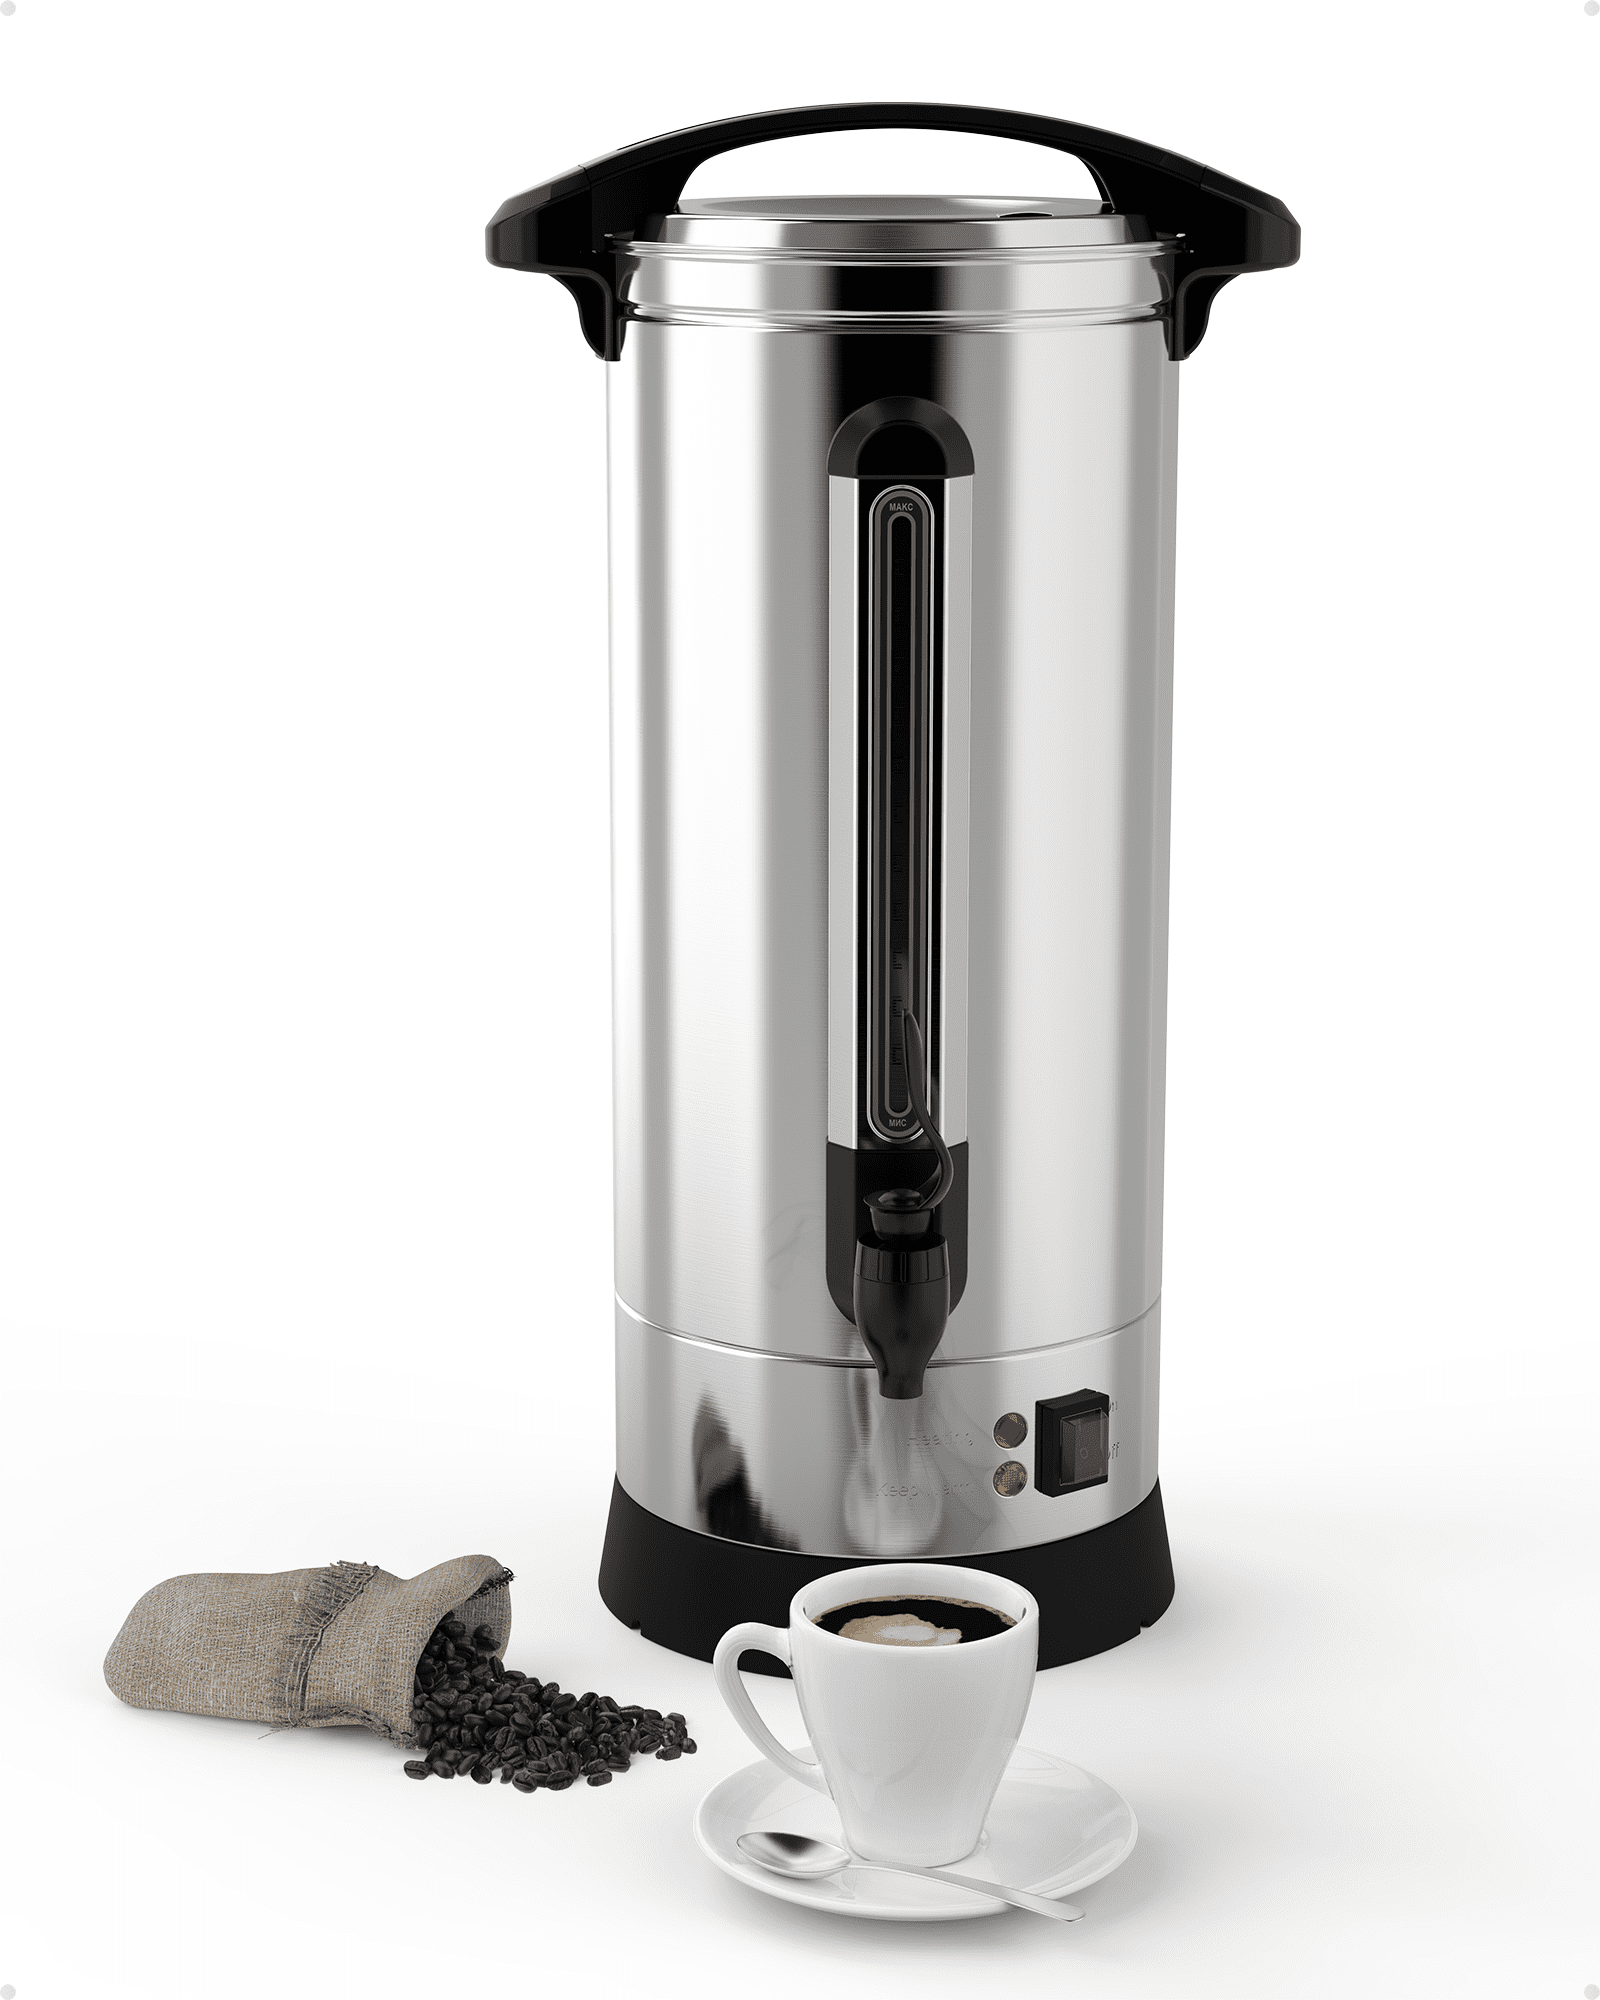 BUNN Pourover 60-Cup Coffeemaker, Stainless Steel